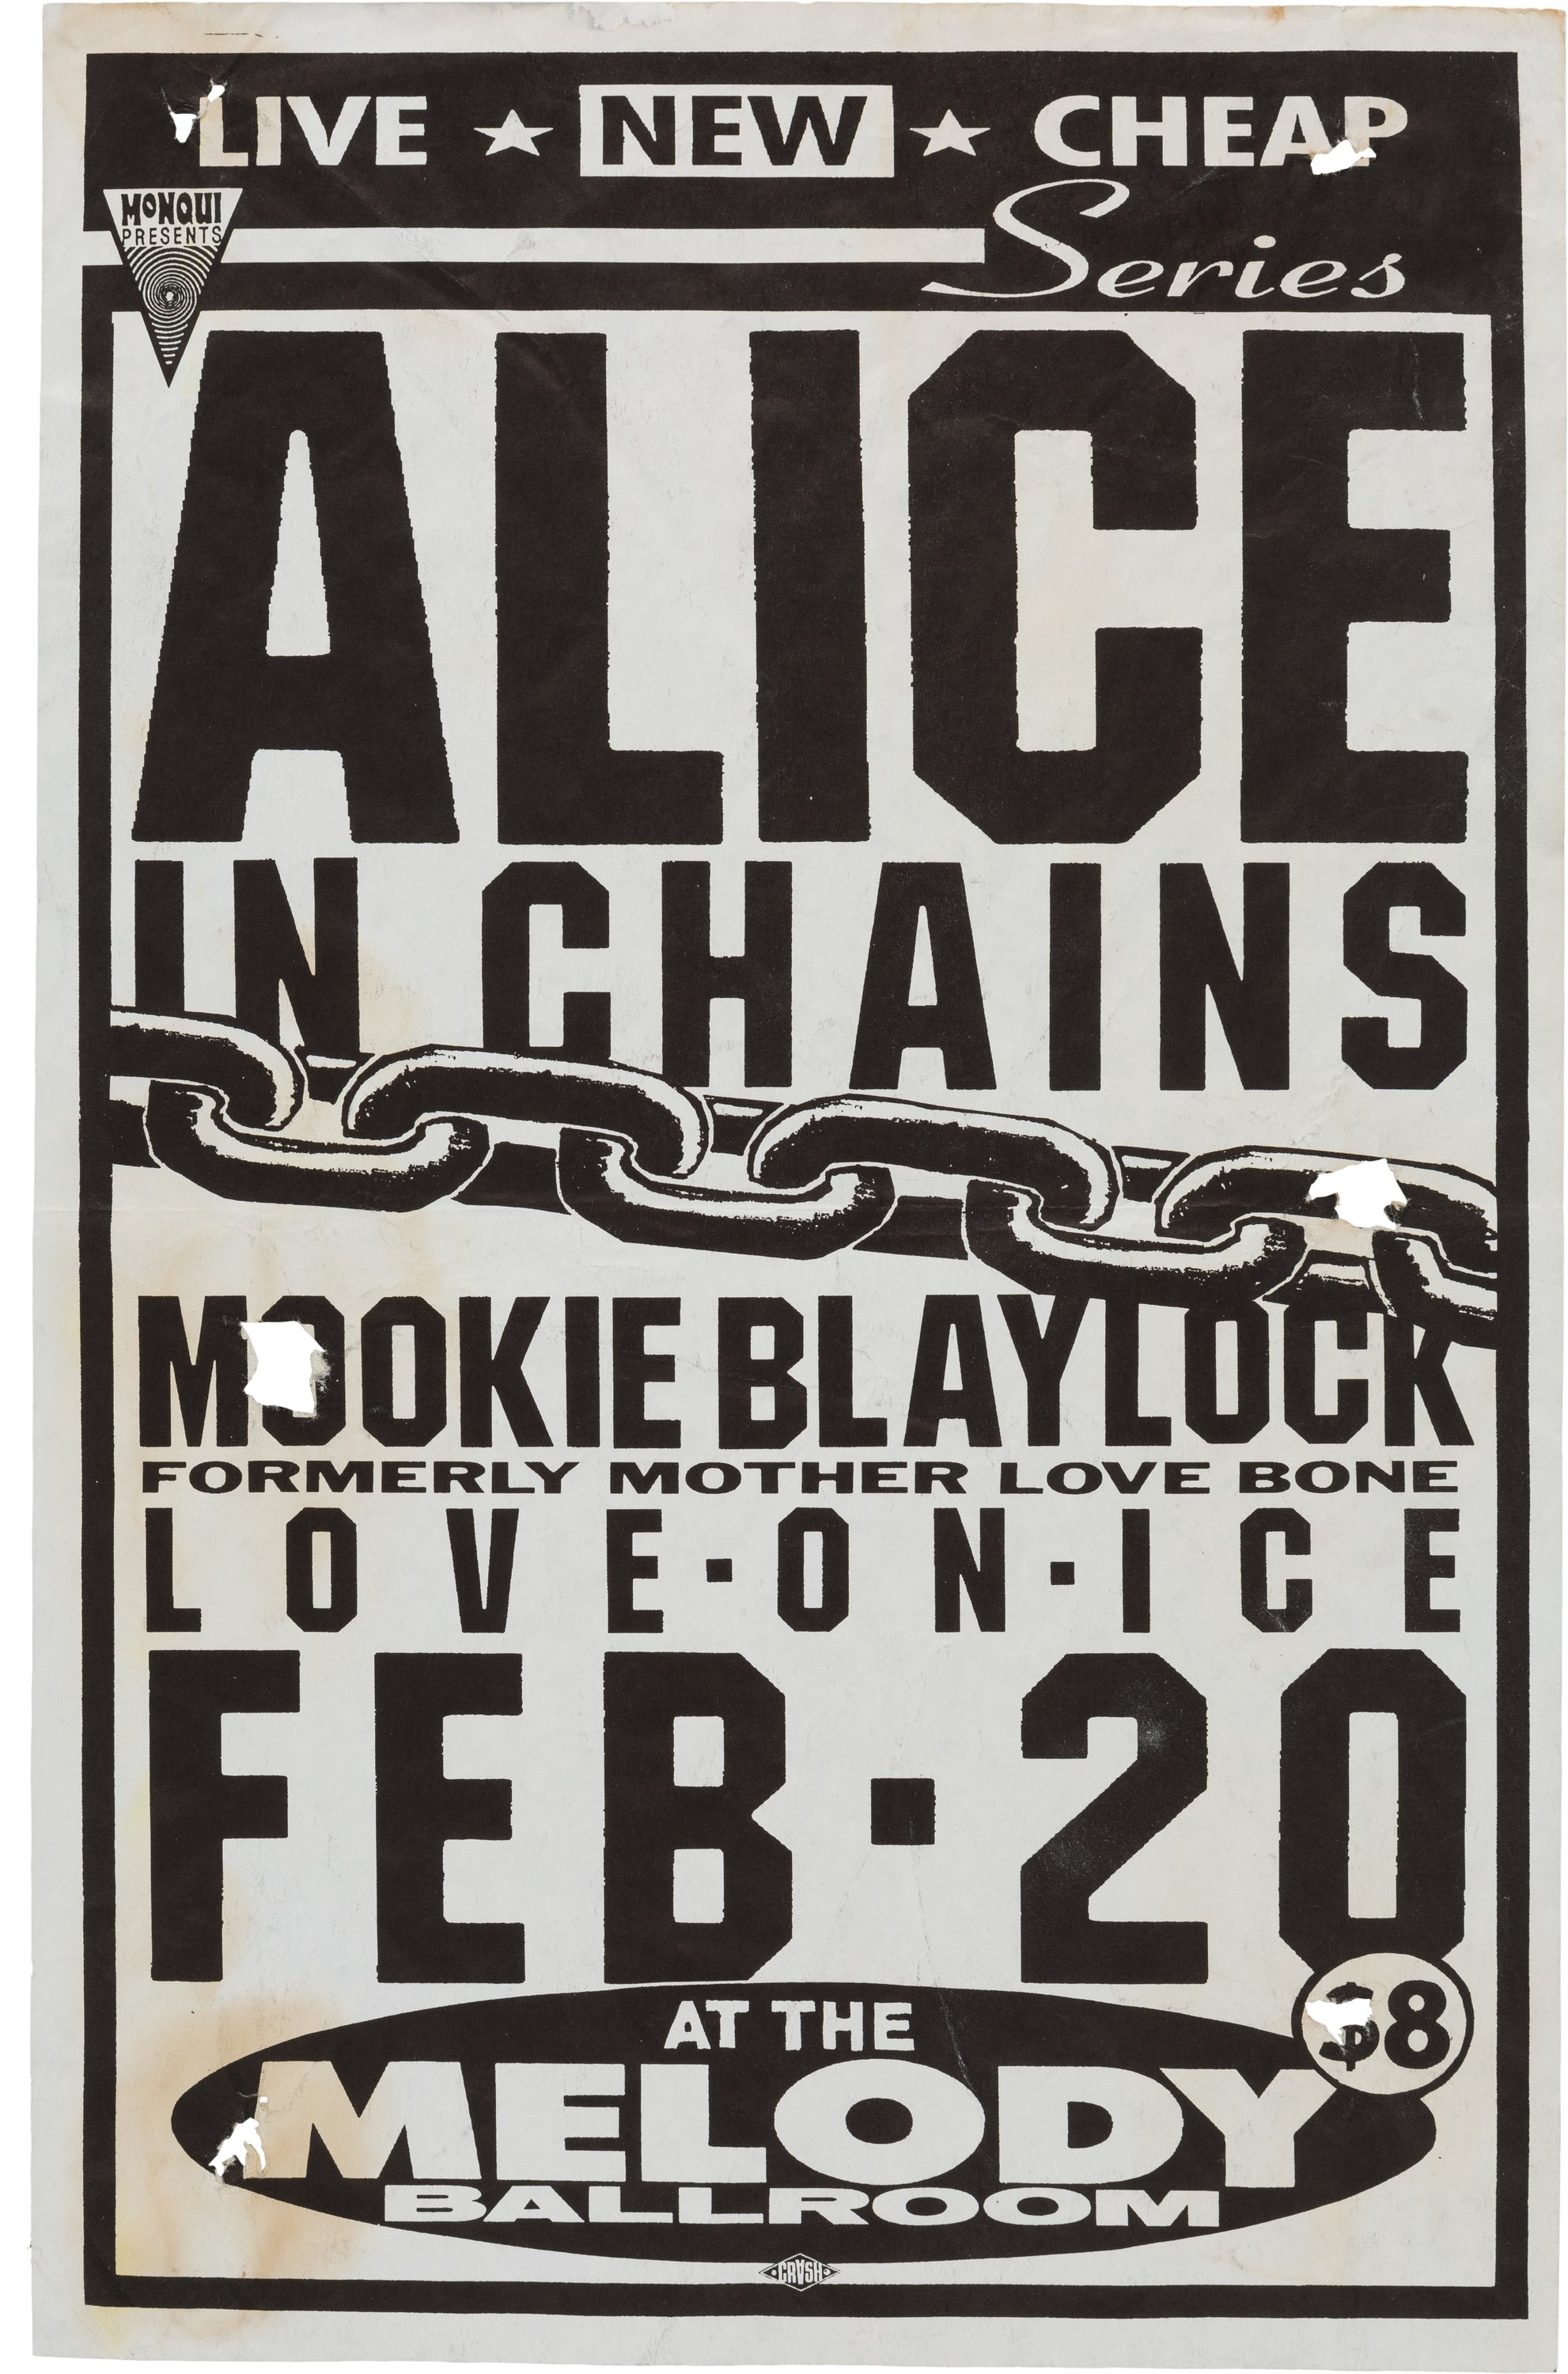 Alice in Chains/Mookie Blaylock Melody Ballroom Concert Poster